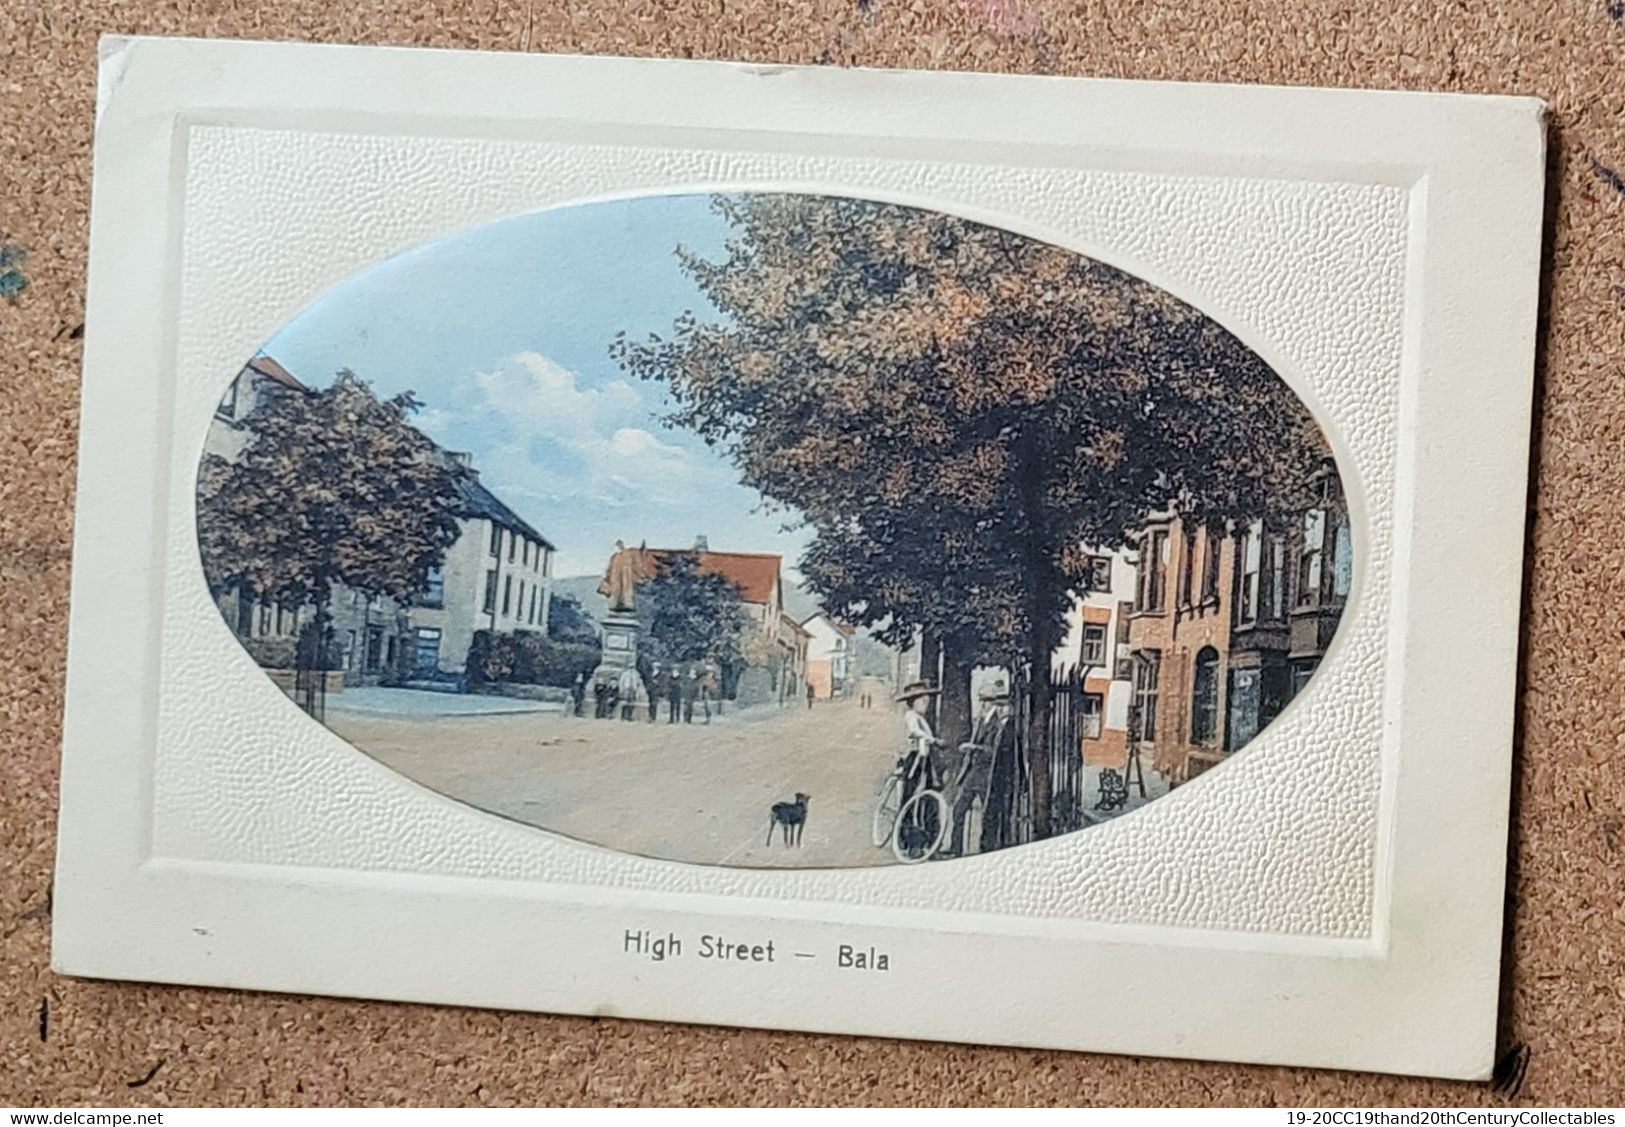 Very Nice, Old Card Of Bala Highstreet, Wales Very Neatly Written Used Old Card In Excellent Condition - Merionethshire